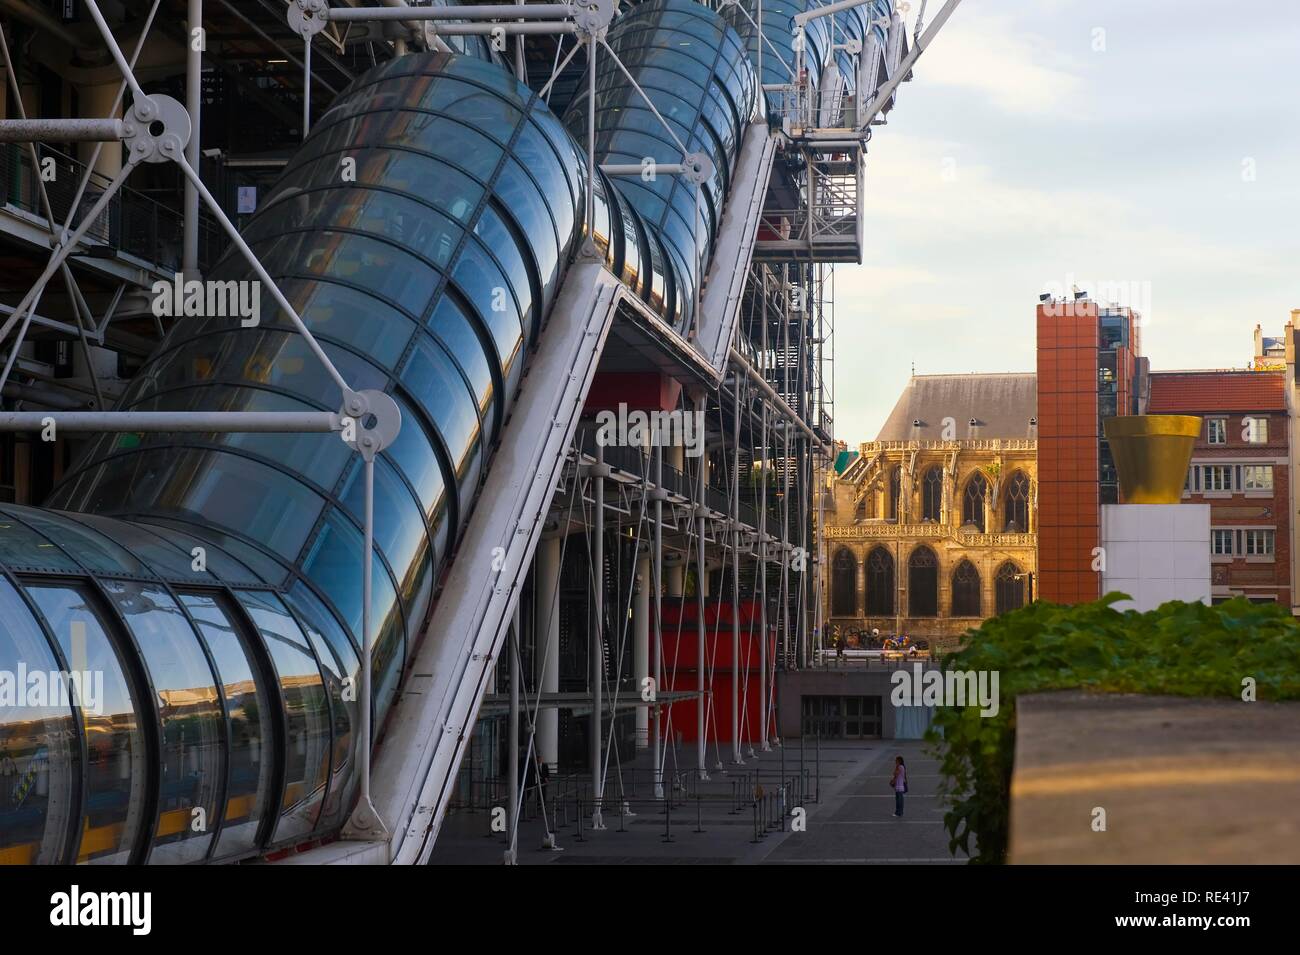 Pompidou Center or Centre Georges Pompidou, also known as Beaubourg, Paris, France, Europe Stock Photo